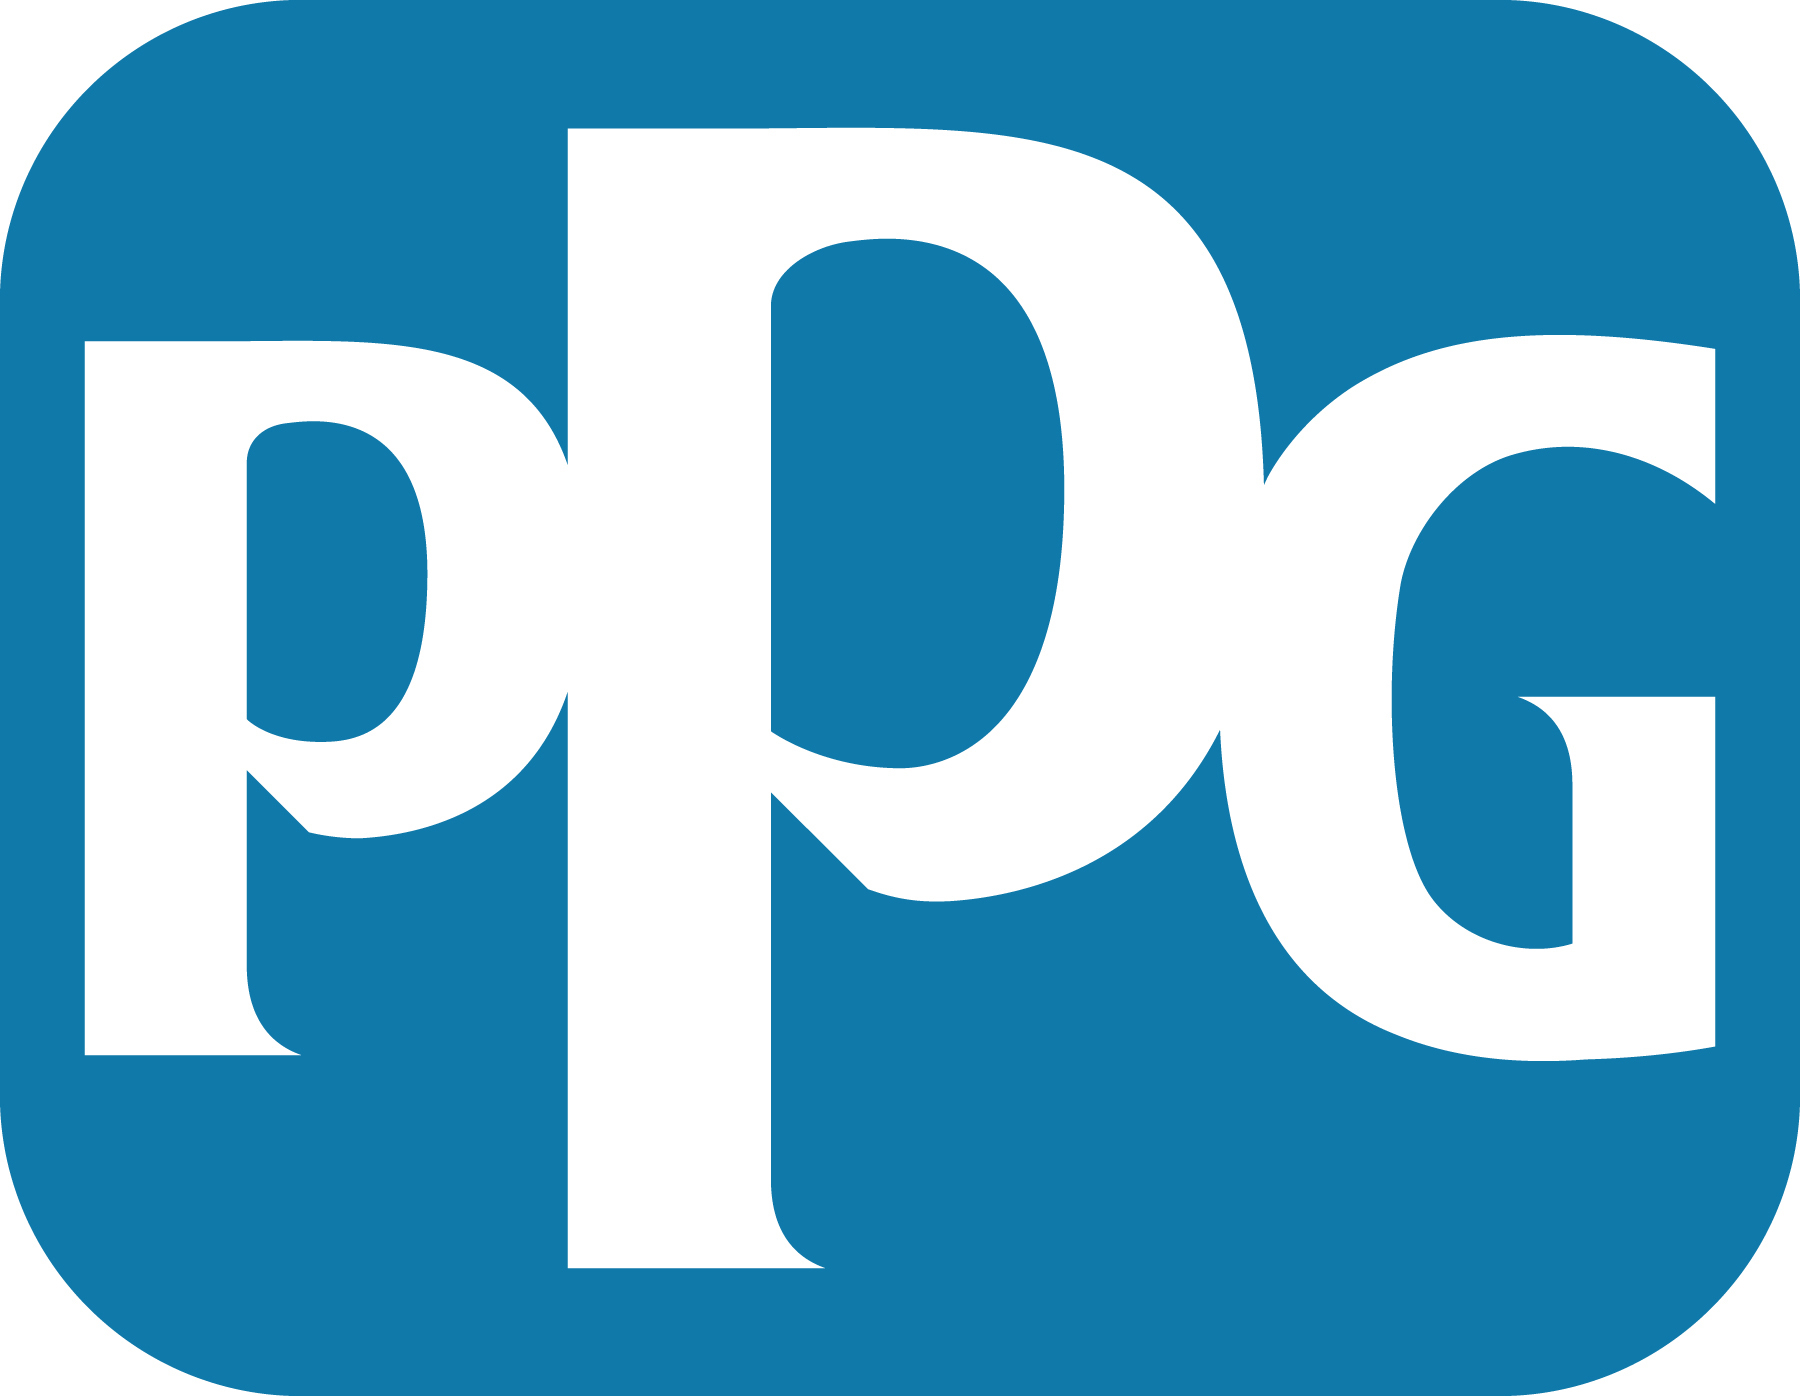 PPG COMEX Completes $ Million Investment in Chihuahua, Mexico  Distribution Center | Business Wire